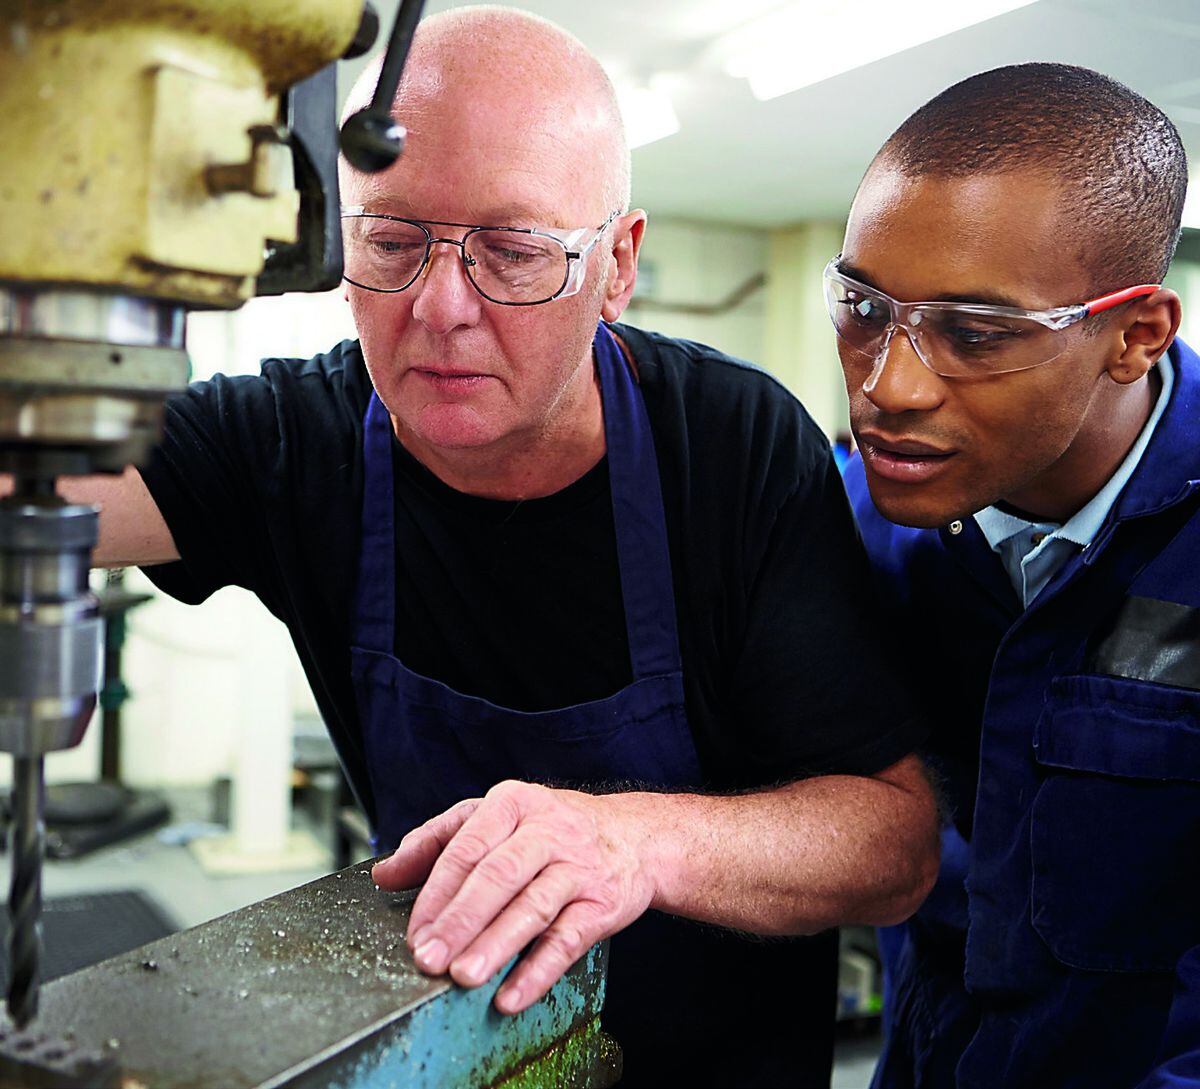 Apprenticeships are now becoming increasingly popular.